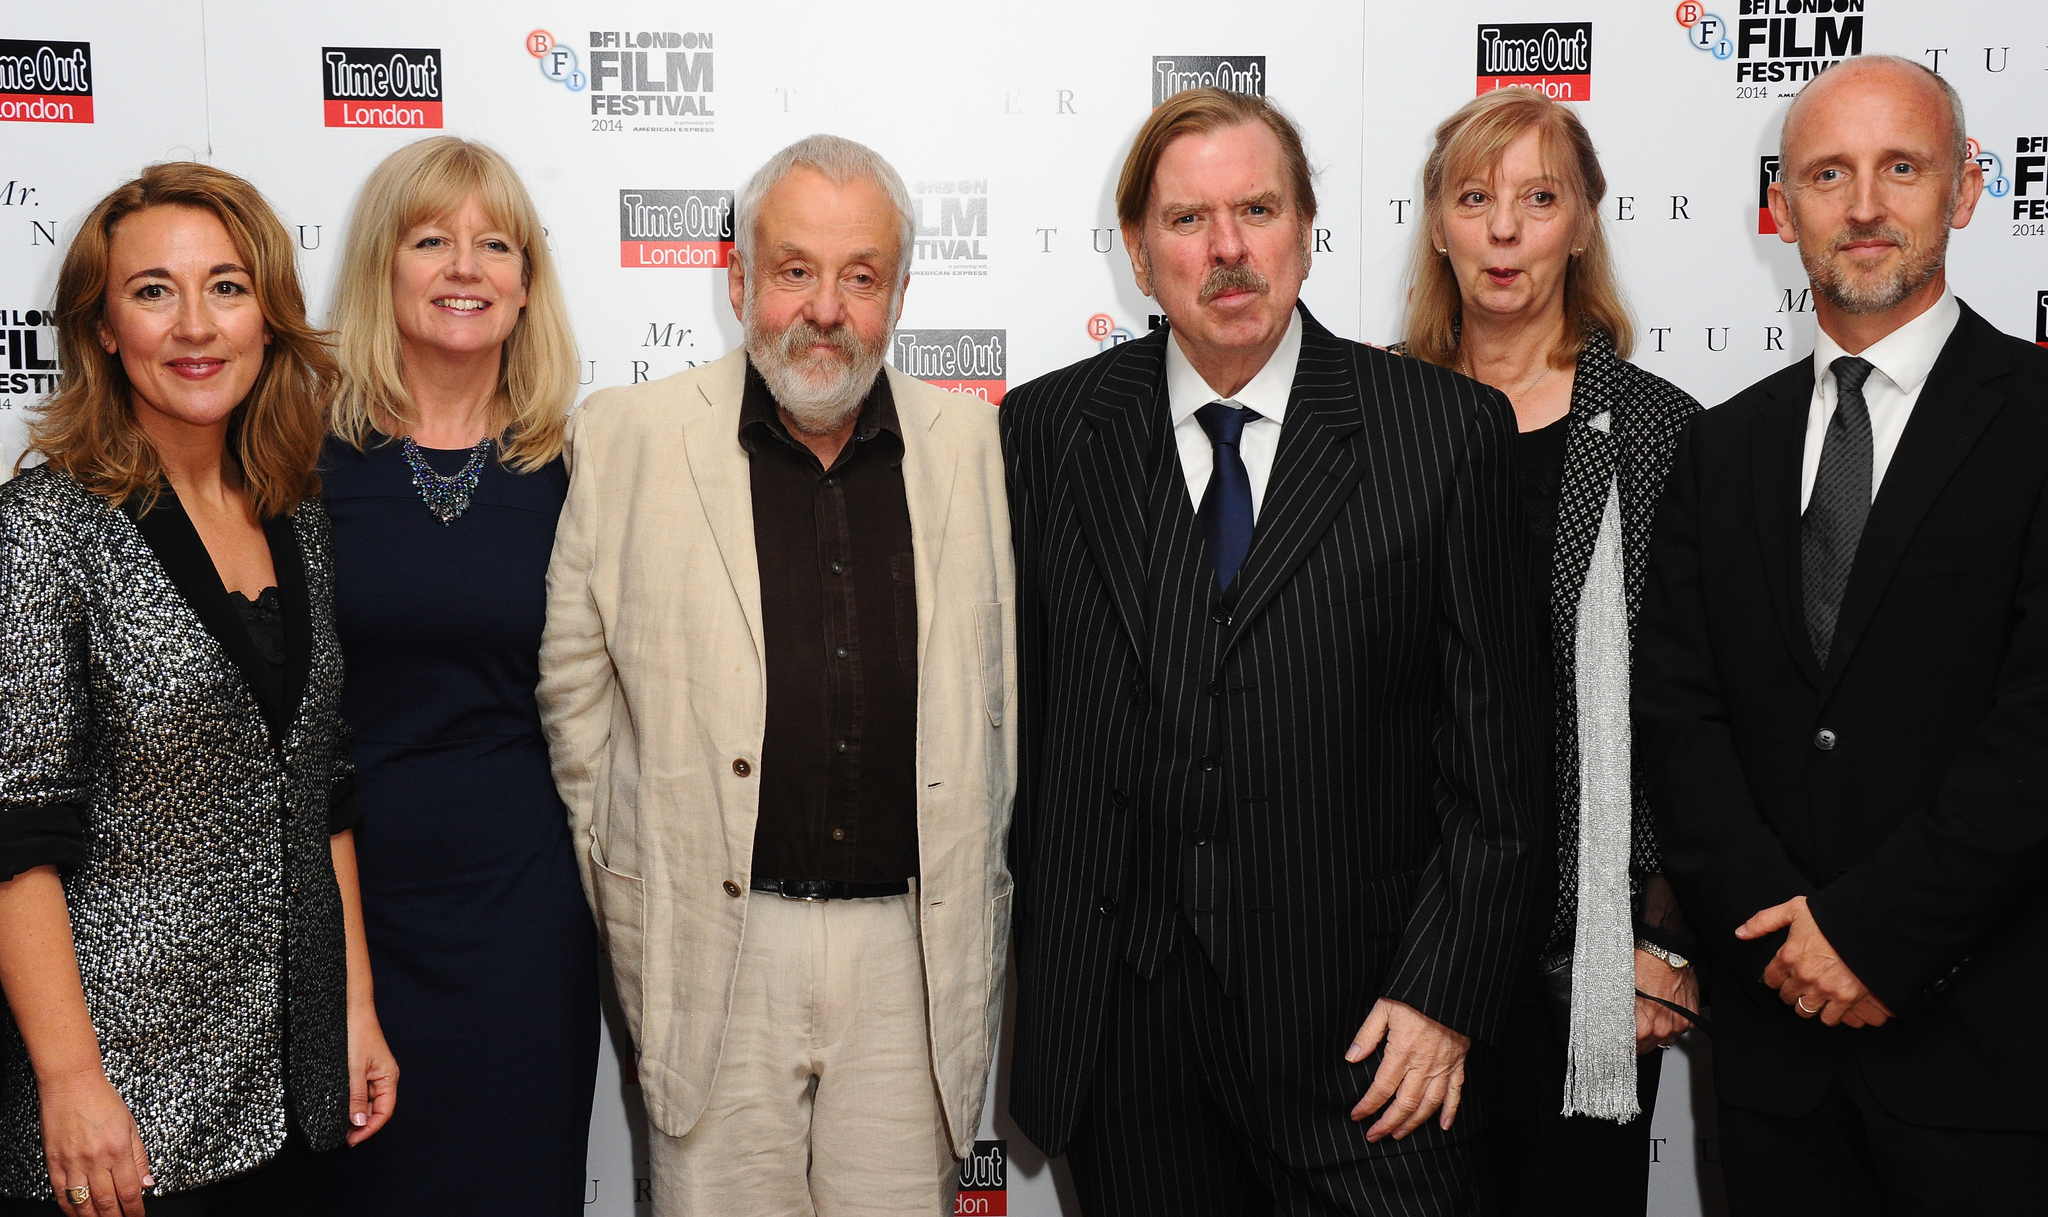 Timothy Spall, Mike Leigh, Dorothy Atkinson, Georgina Lowe, Martin Savage and Ruth Sheen at event of Mr. Turner (2014)